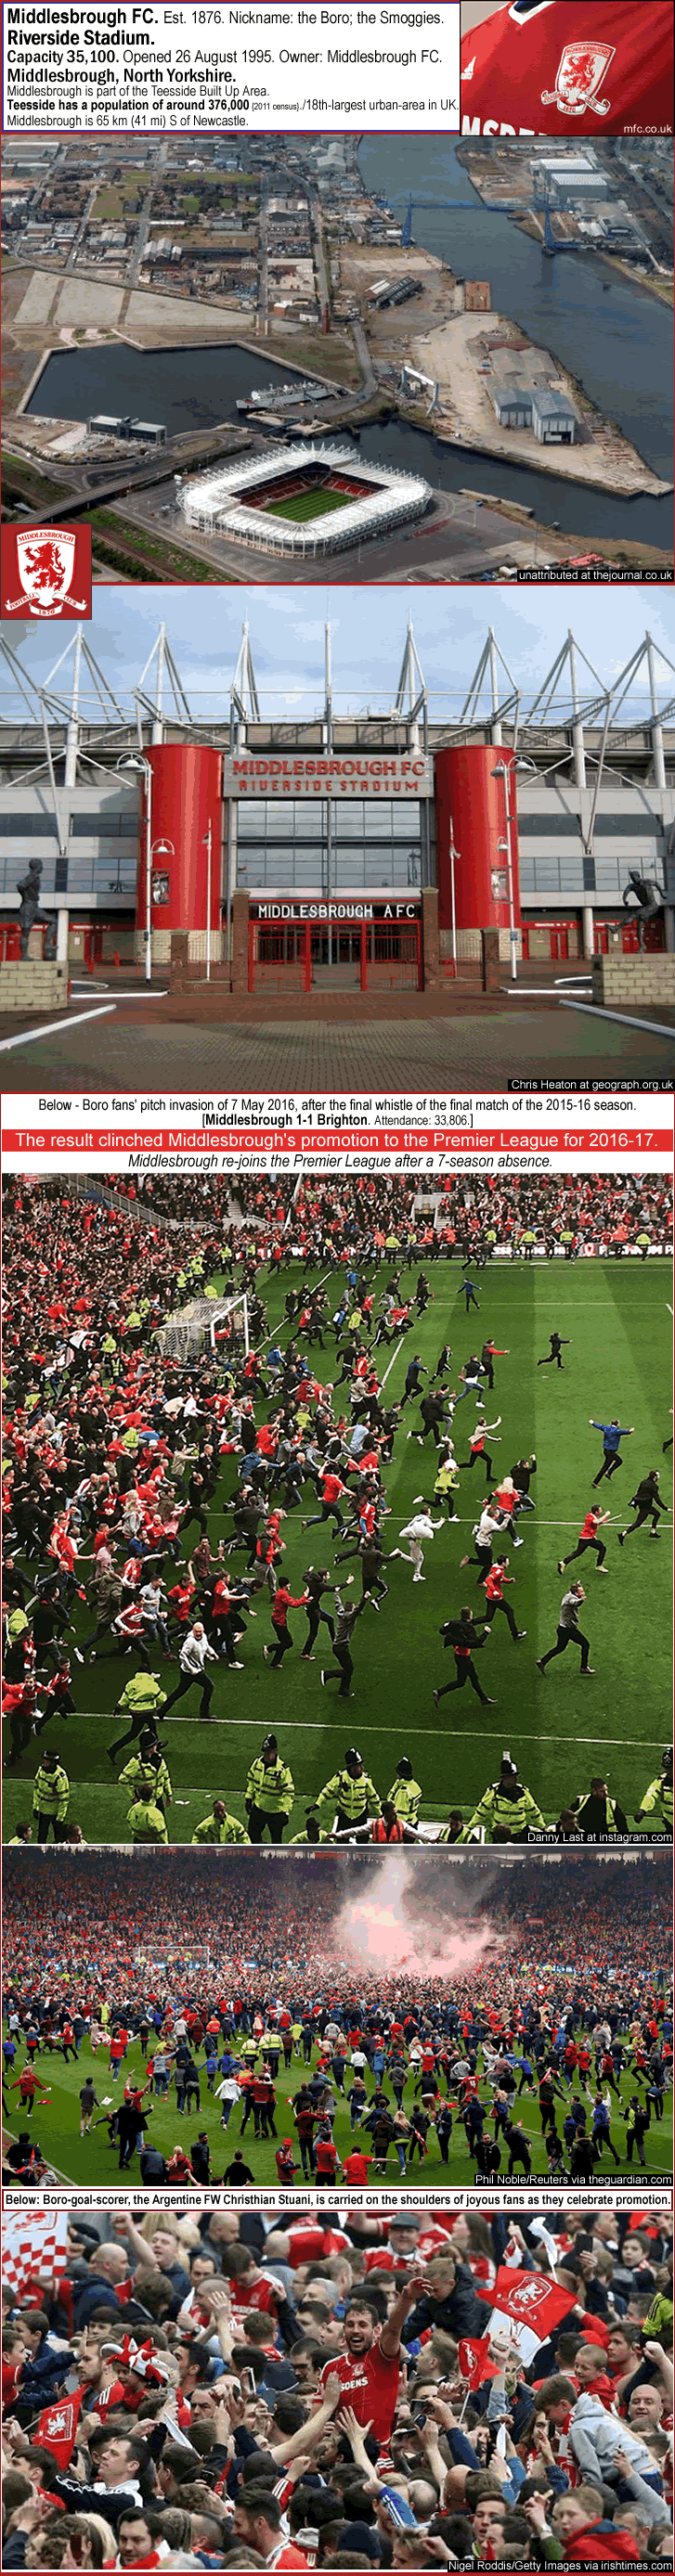 middlesbrough_promoted-7-may-2016_riverside-stadium_pitch-invasion_h_.gif